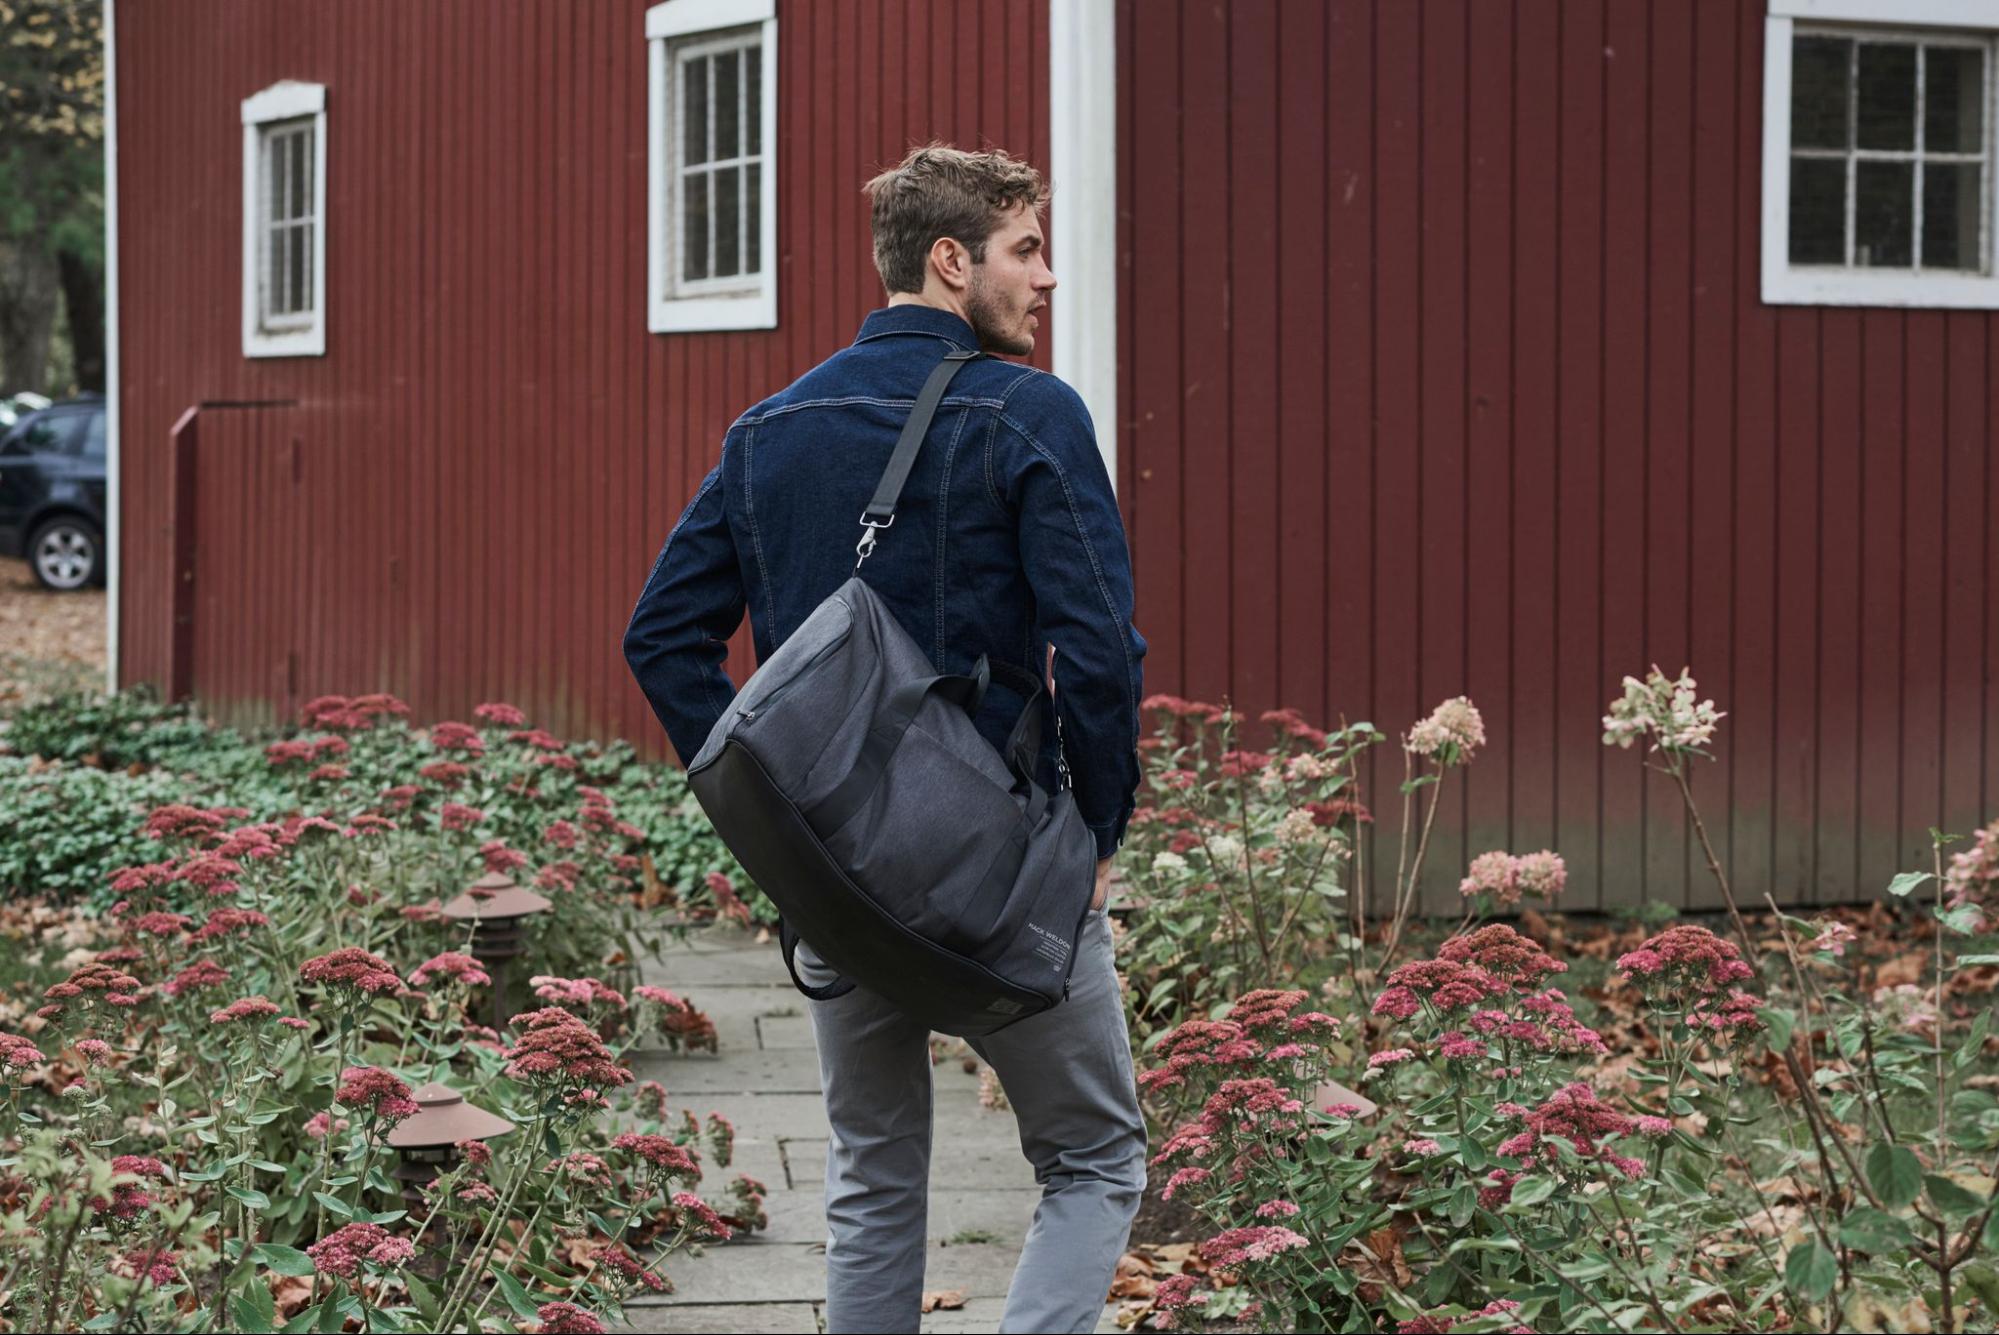 Lifestyle image of a man in a garden wearing a denim jacket with a duffel bag on his shoulder.